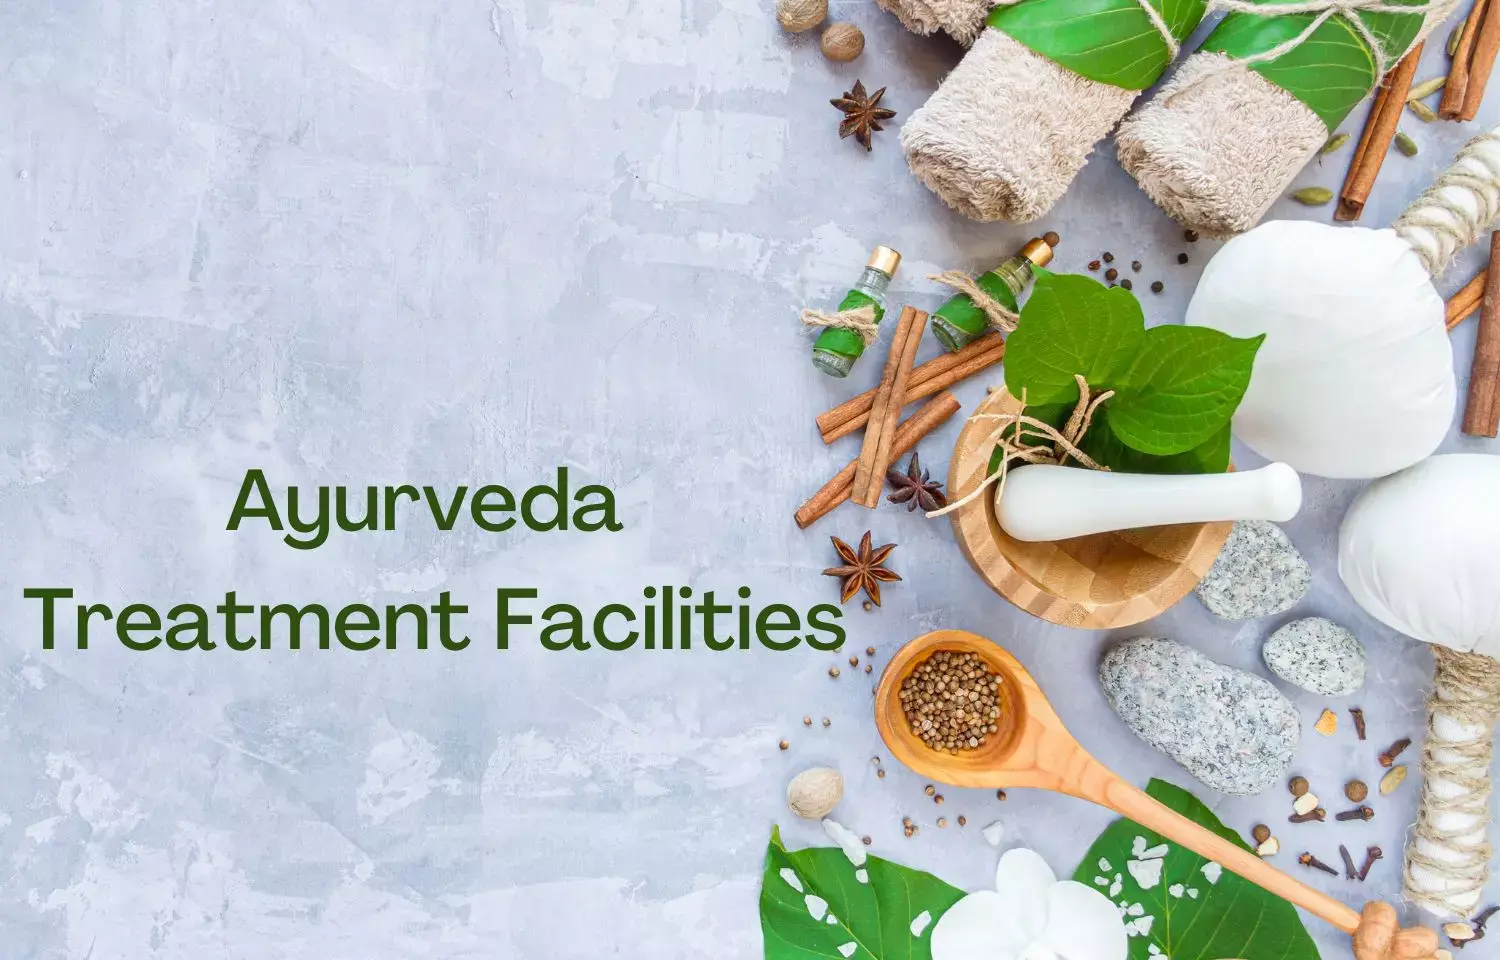 Over 700 patients availed Ayurveda treatment at 12 AFMS Hospitals